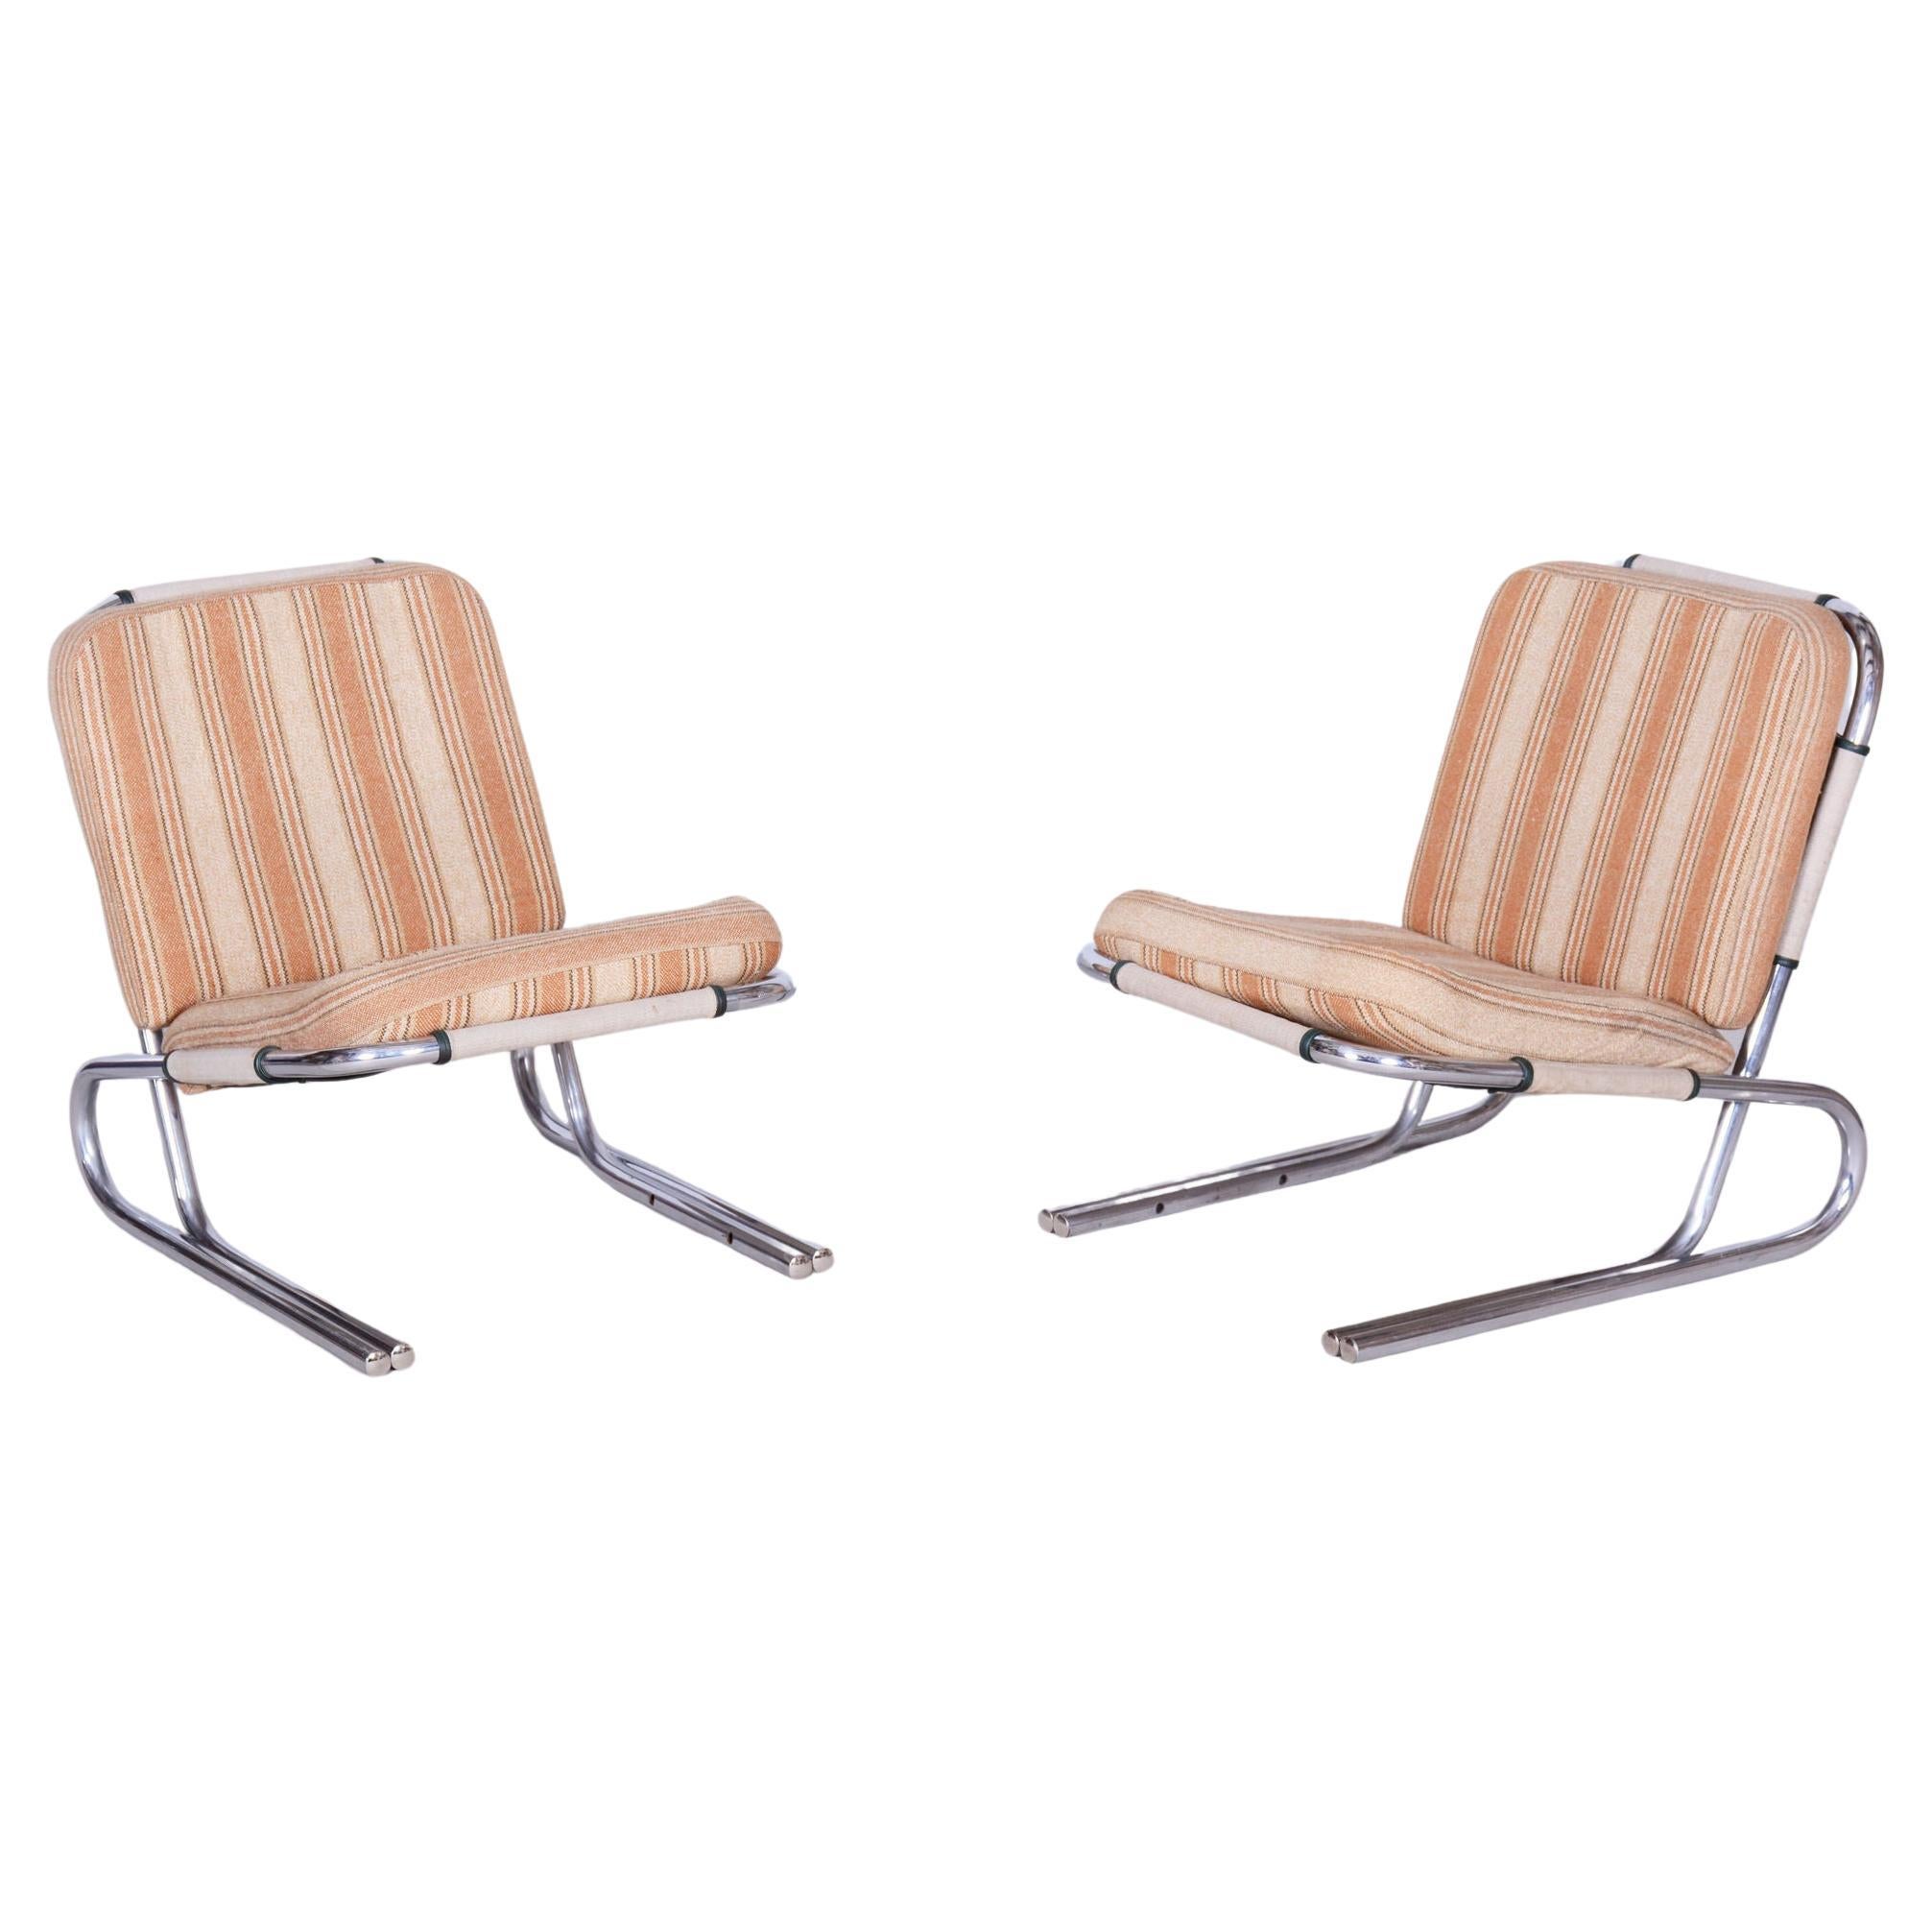 Set of Two Original Bauhaus Armchairs, Chrome-Plated Steel, Germany, 1940s